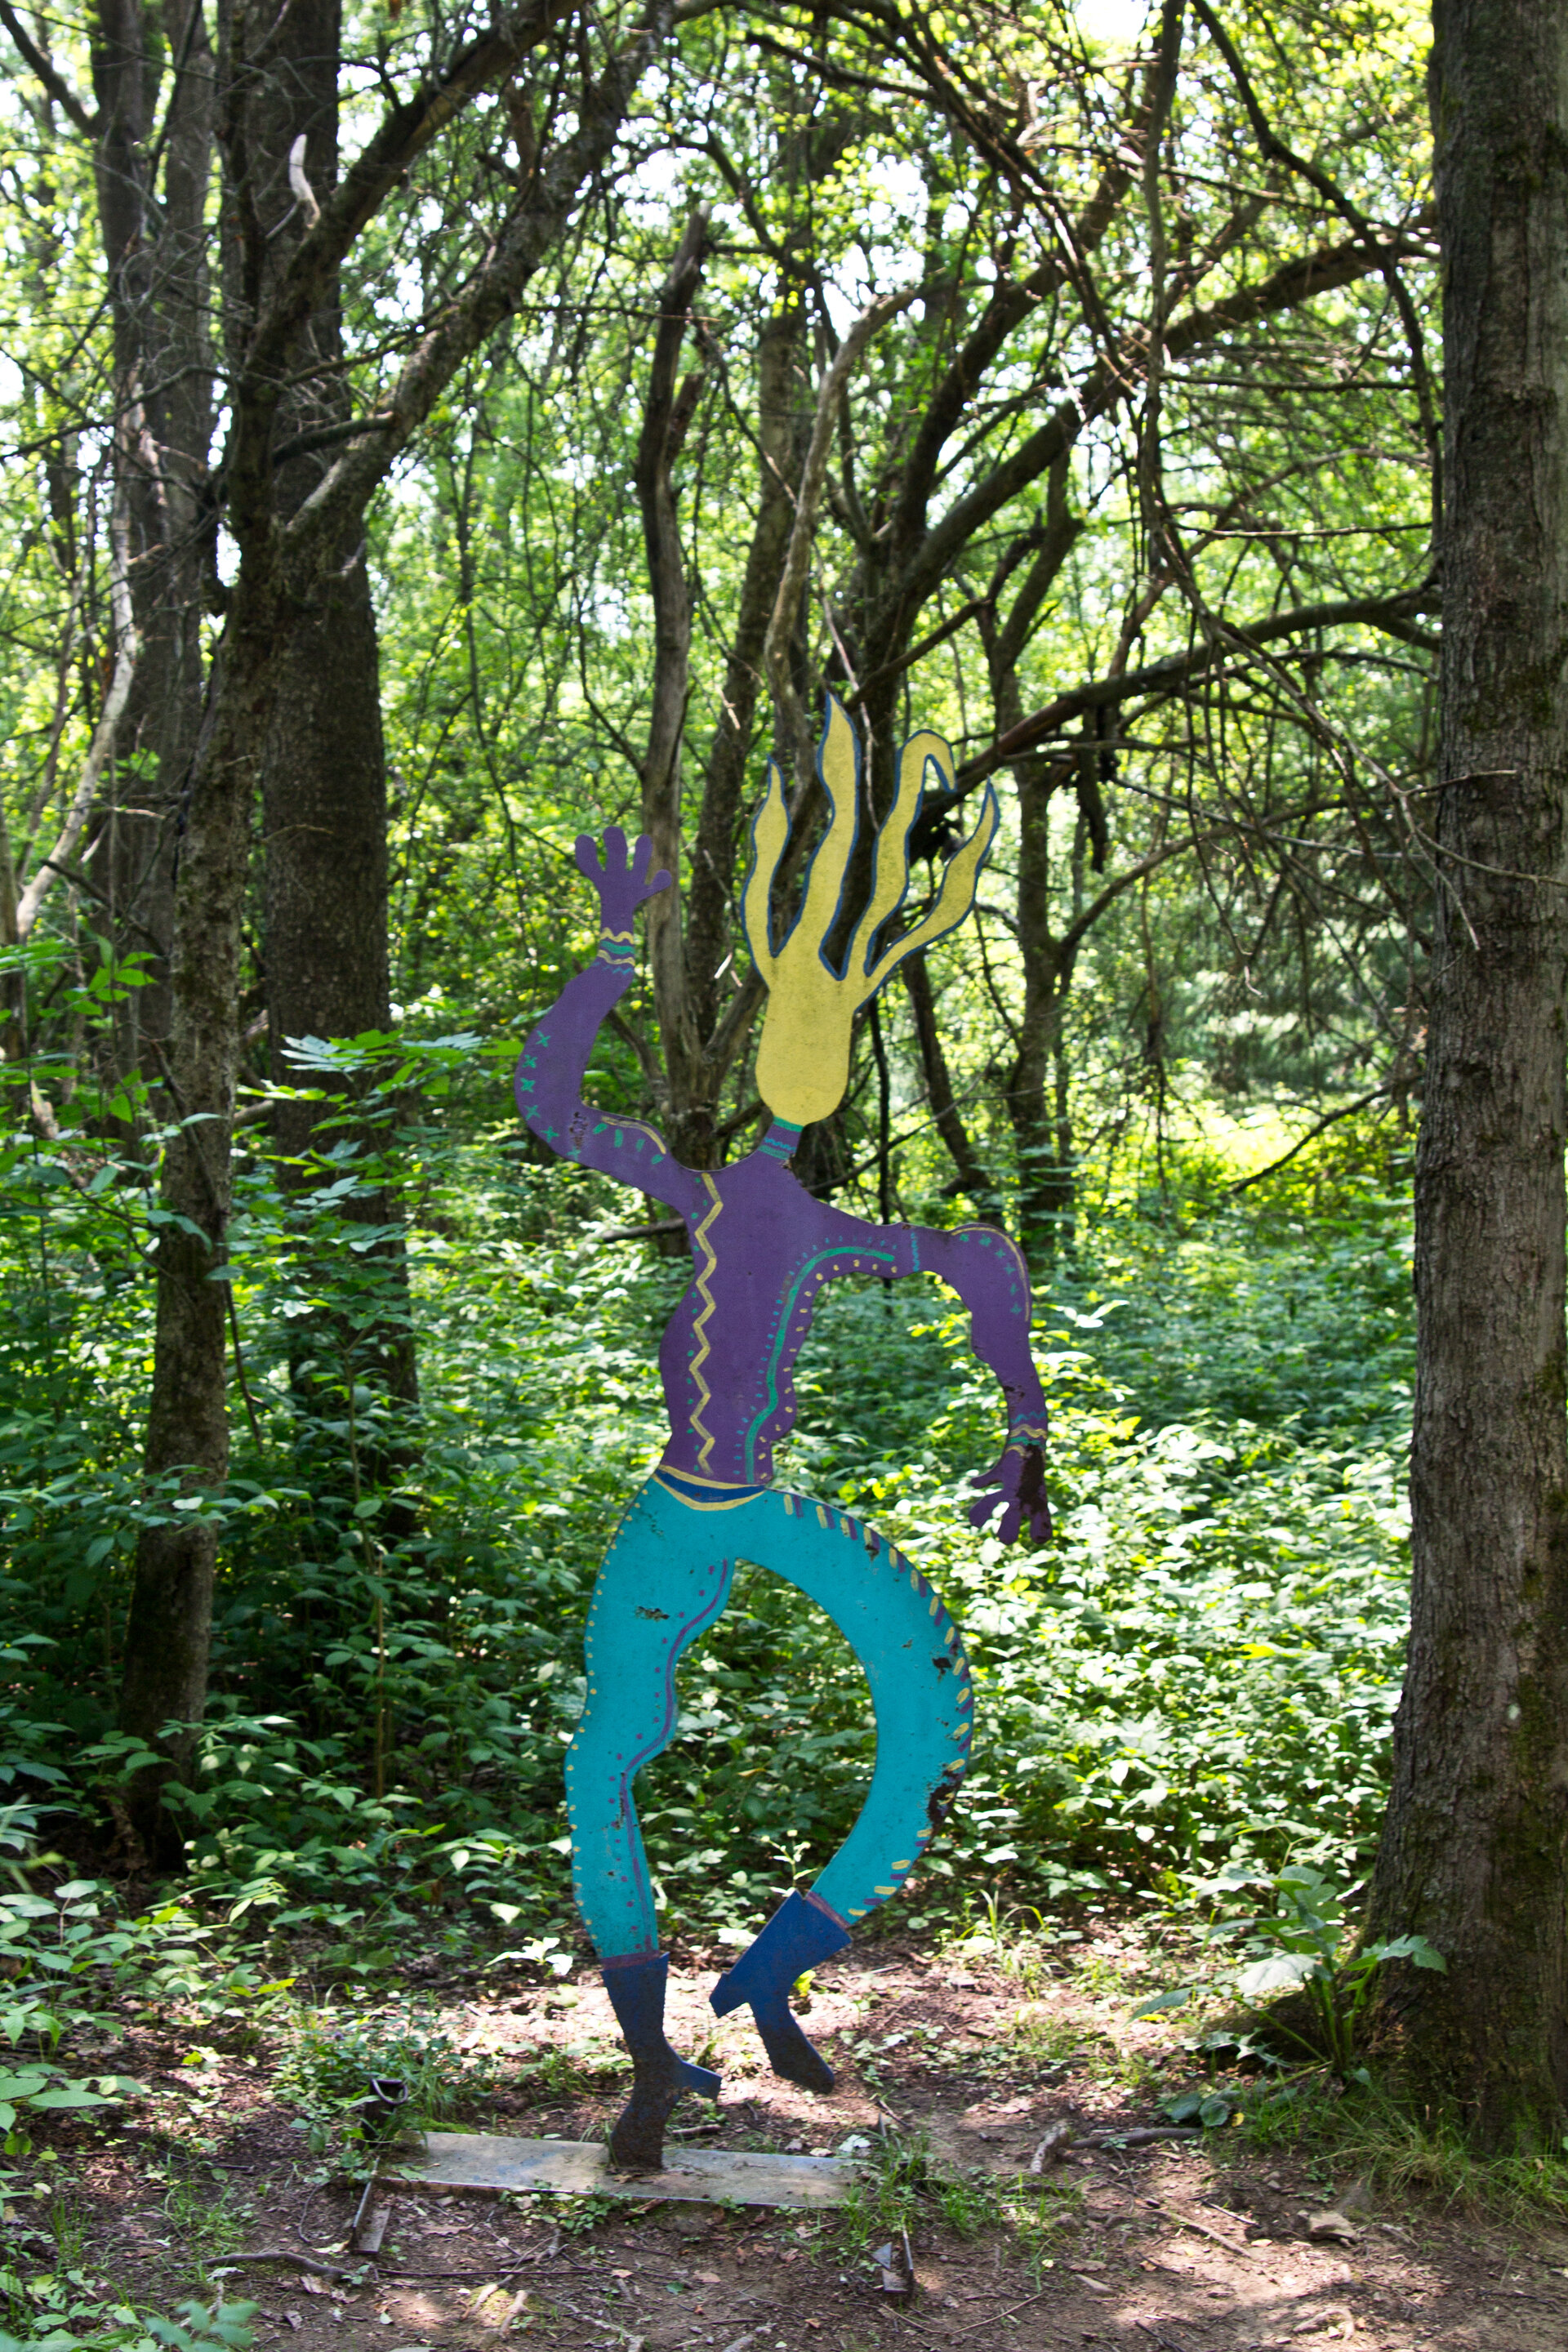 a-sculpture-in-the-woods-at-griffis-sculpture-park